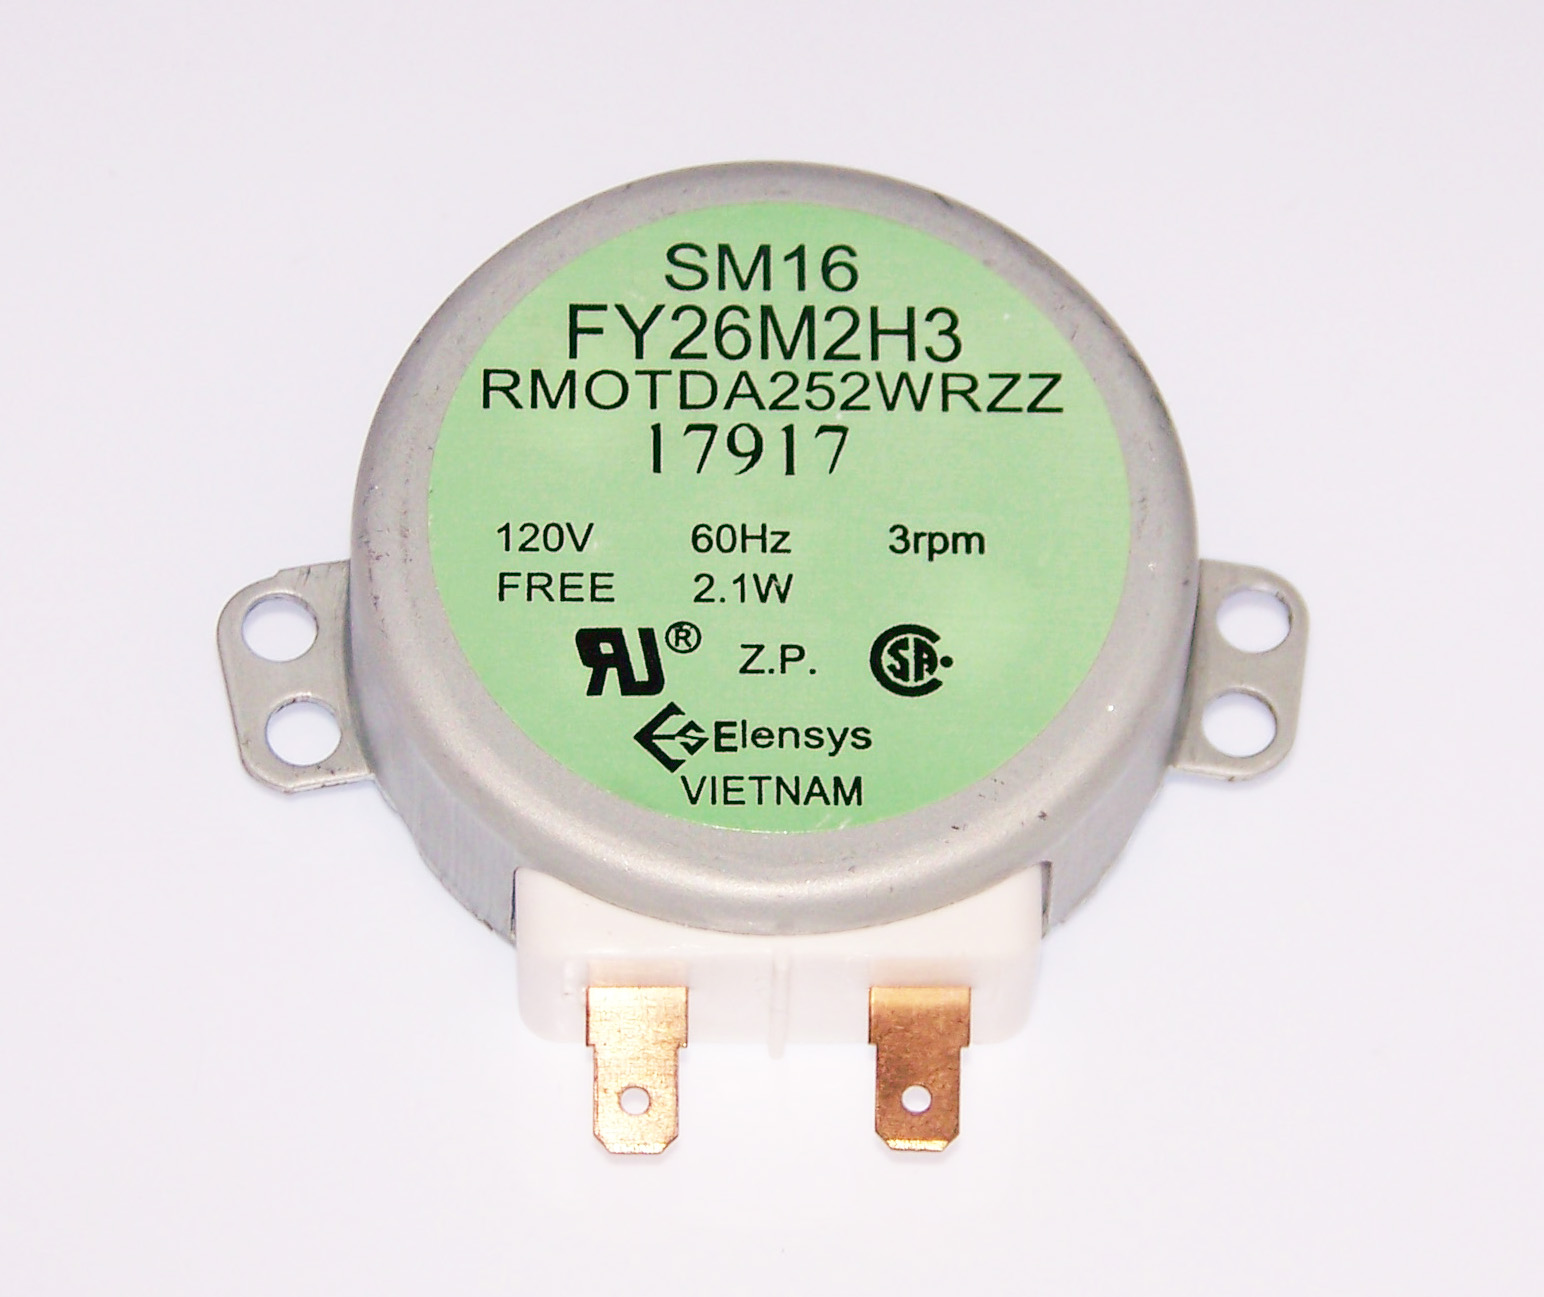 New OEM Sharp Microwave Turntable Motor Originally Shipped With R308JS, R-308JS - image 1 of 7